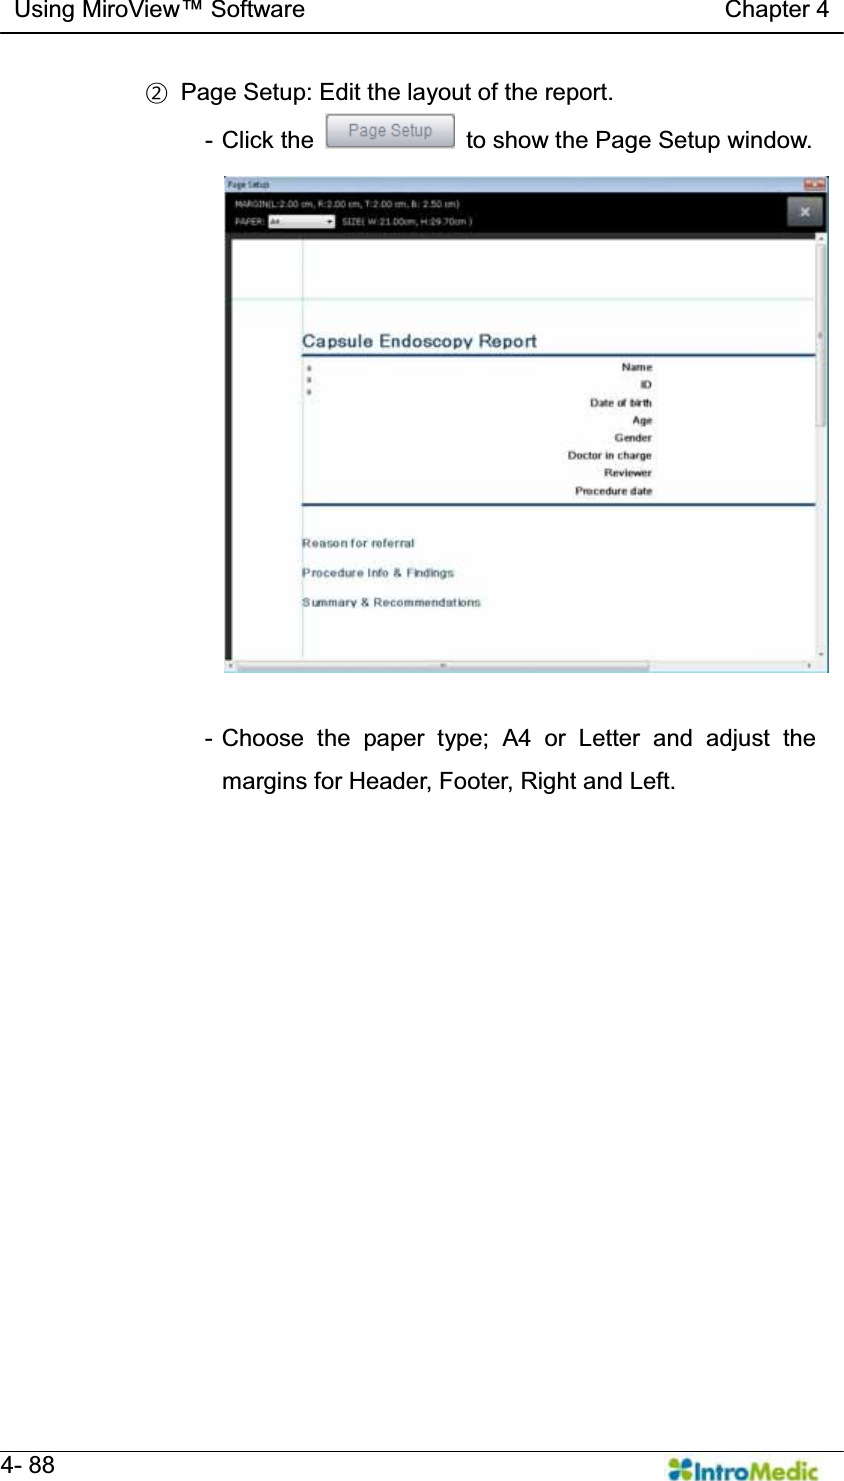   Using MiroView Software                                   Chapter 4   4- 88 ¤  Page Setup: Edit the layout of the report. - Click the    to show the Page Setup window.  - Choose the paper type; A4 or Letter and adjust the margins for Header, Footer, Right and Left.  